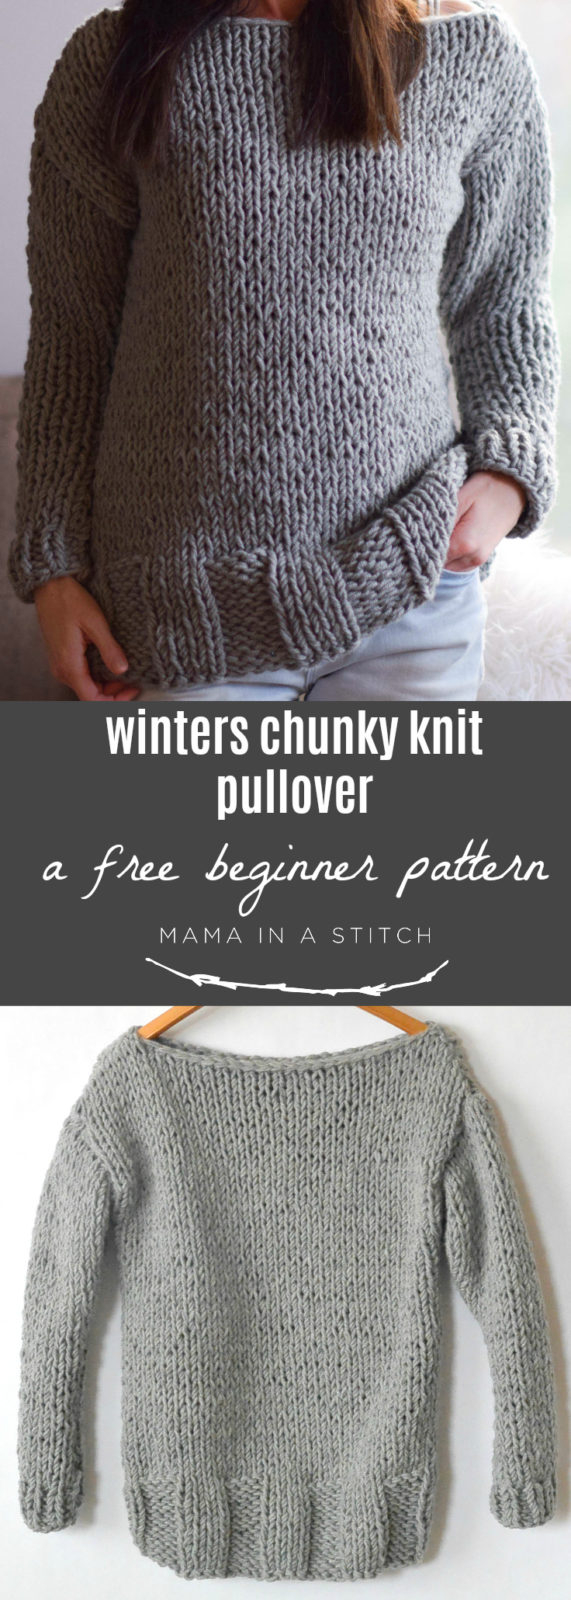 Free Knitting Pattern Sweater Winters Chunky Easy Knit Pullover Pattern Mama In A Stitch